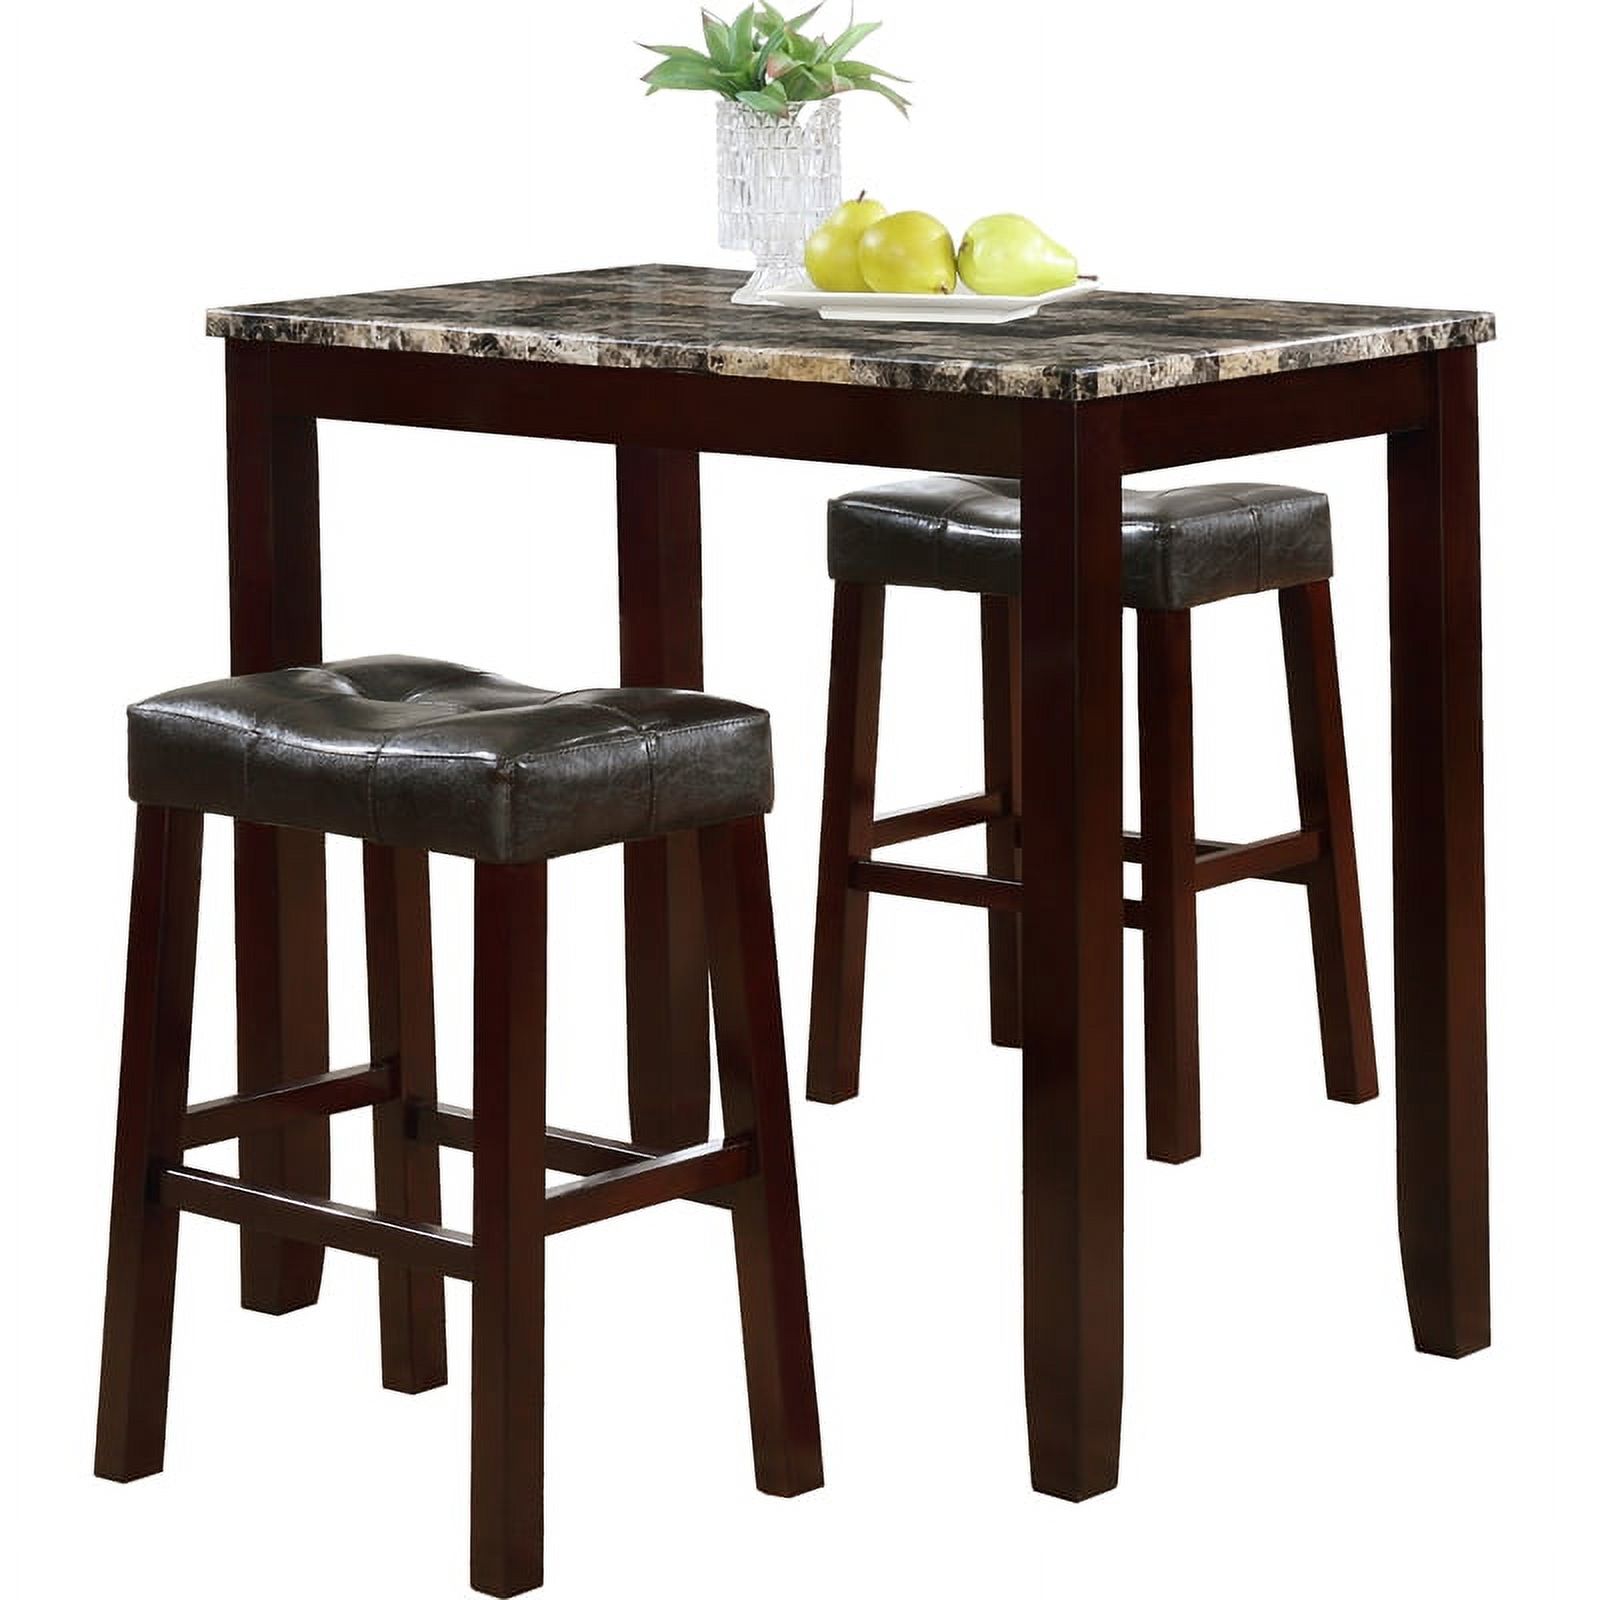 Roundhill Furniture 3Pc Counter Glossy Print Marble Breakfast Table Set Espresso - image 1 of 5